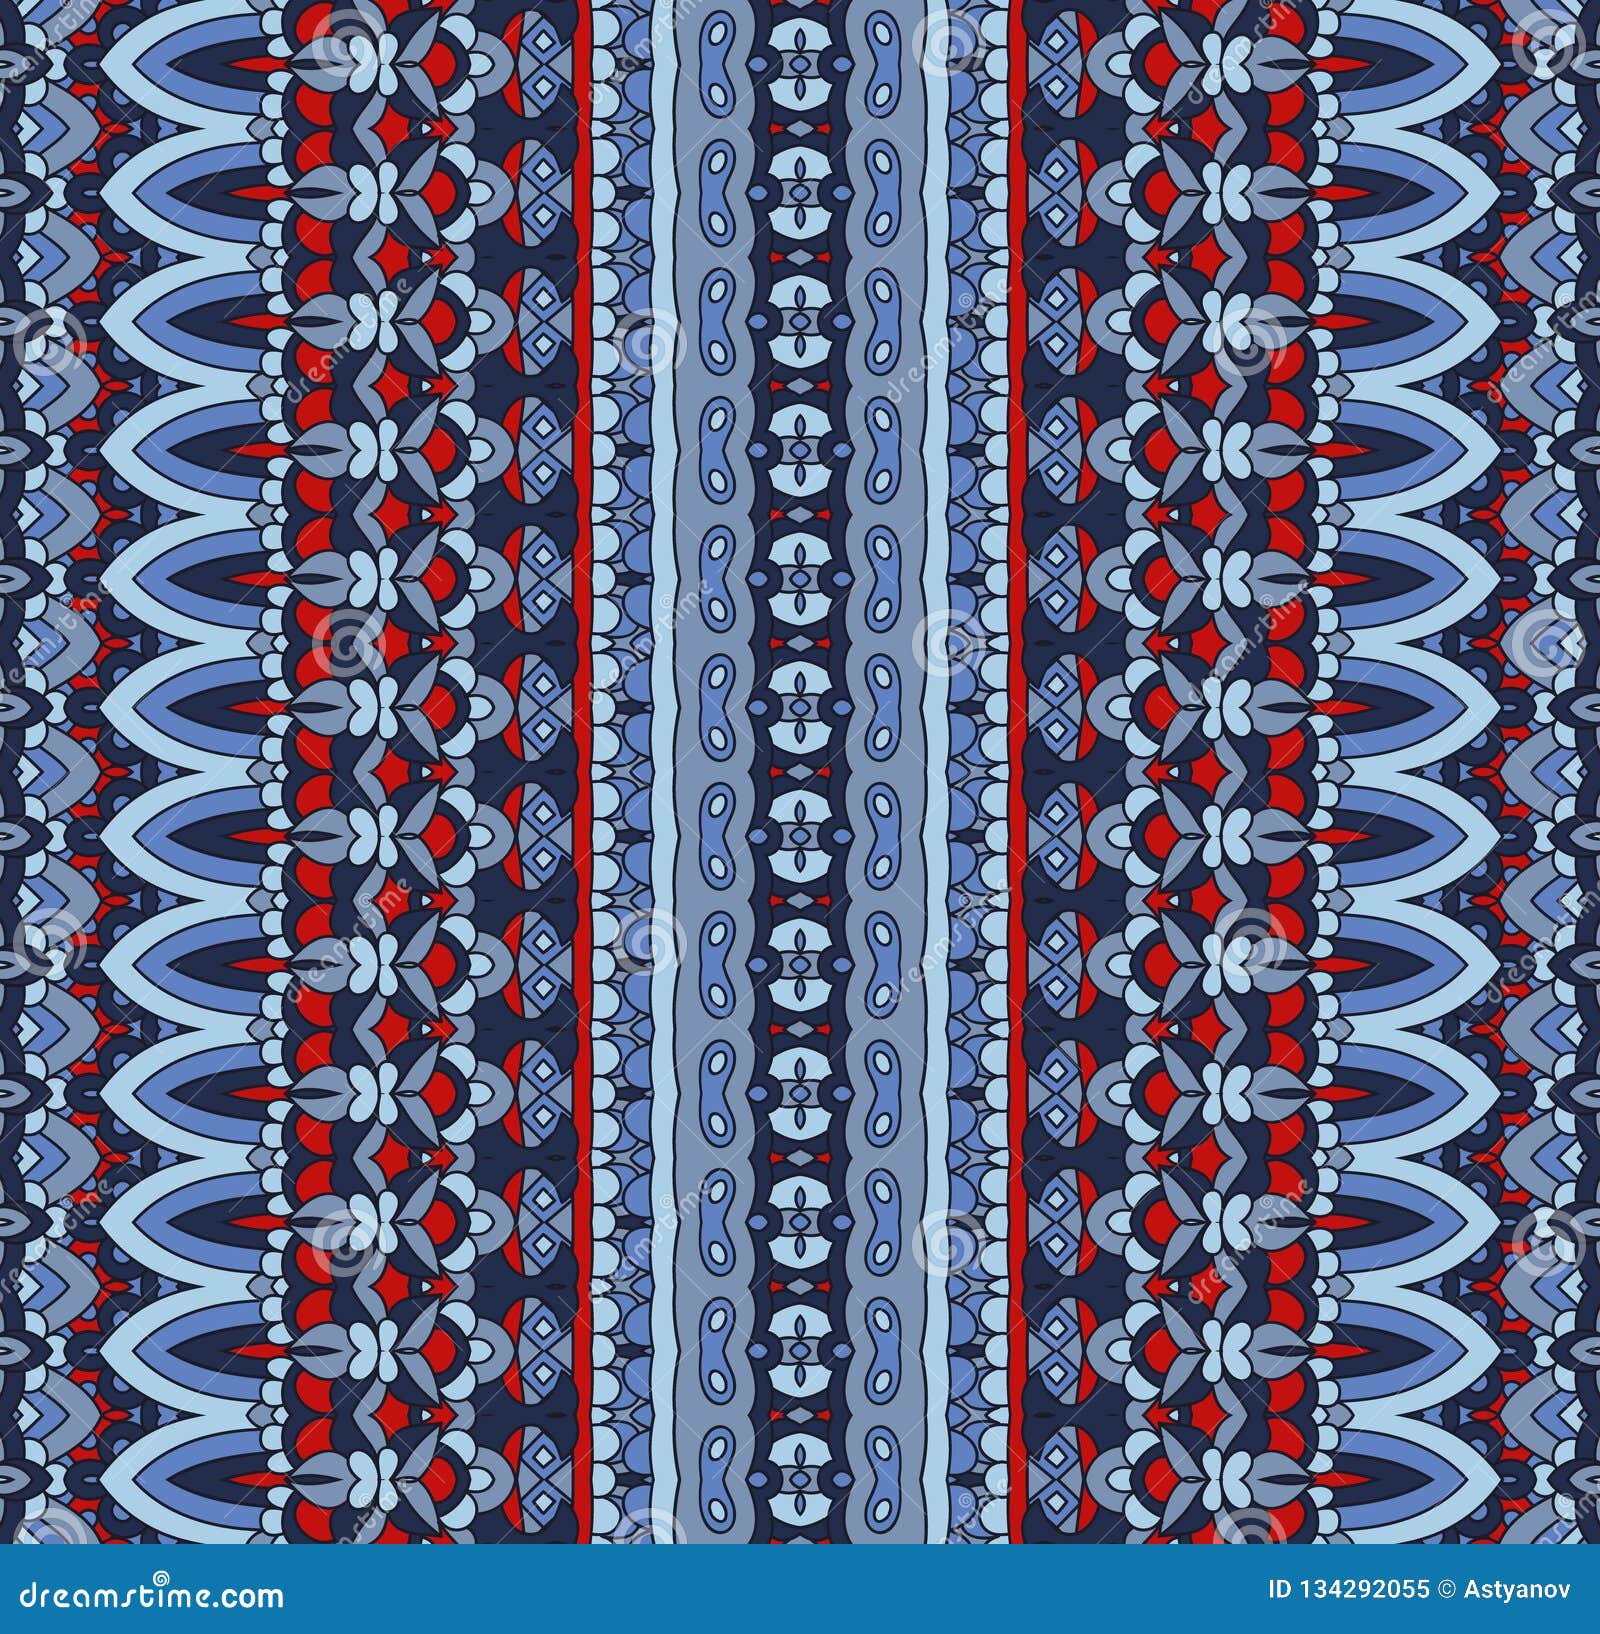 Geometric Fabric Retro Style Seamless Stripes Pattern. Abstract Vector ...